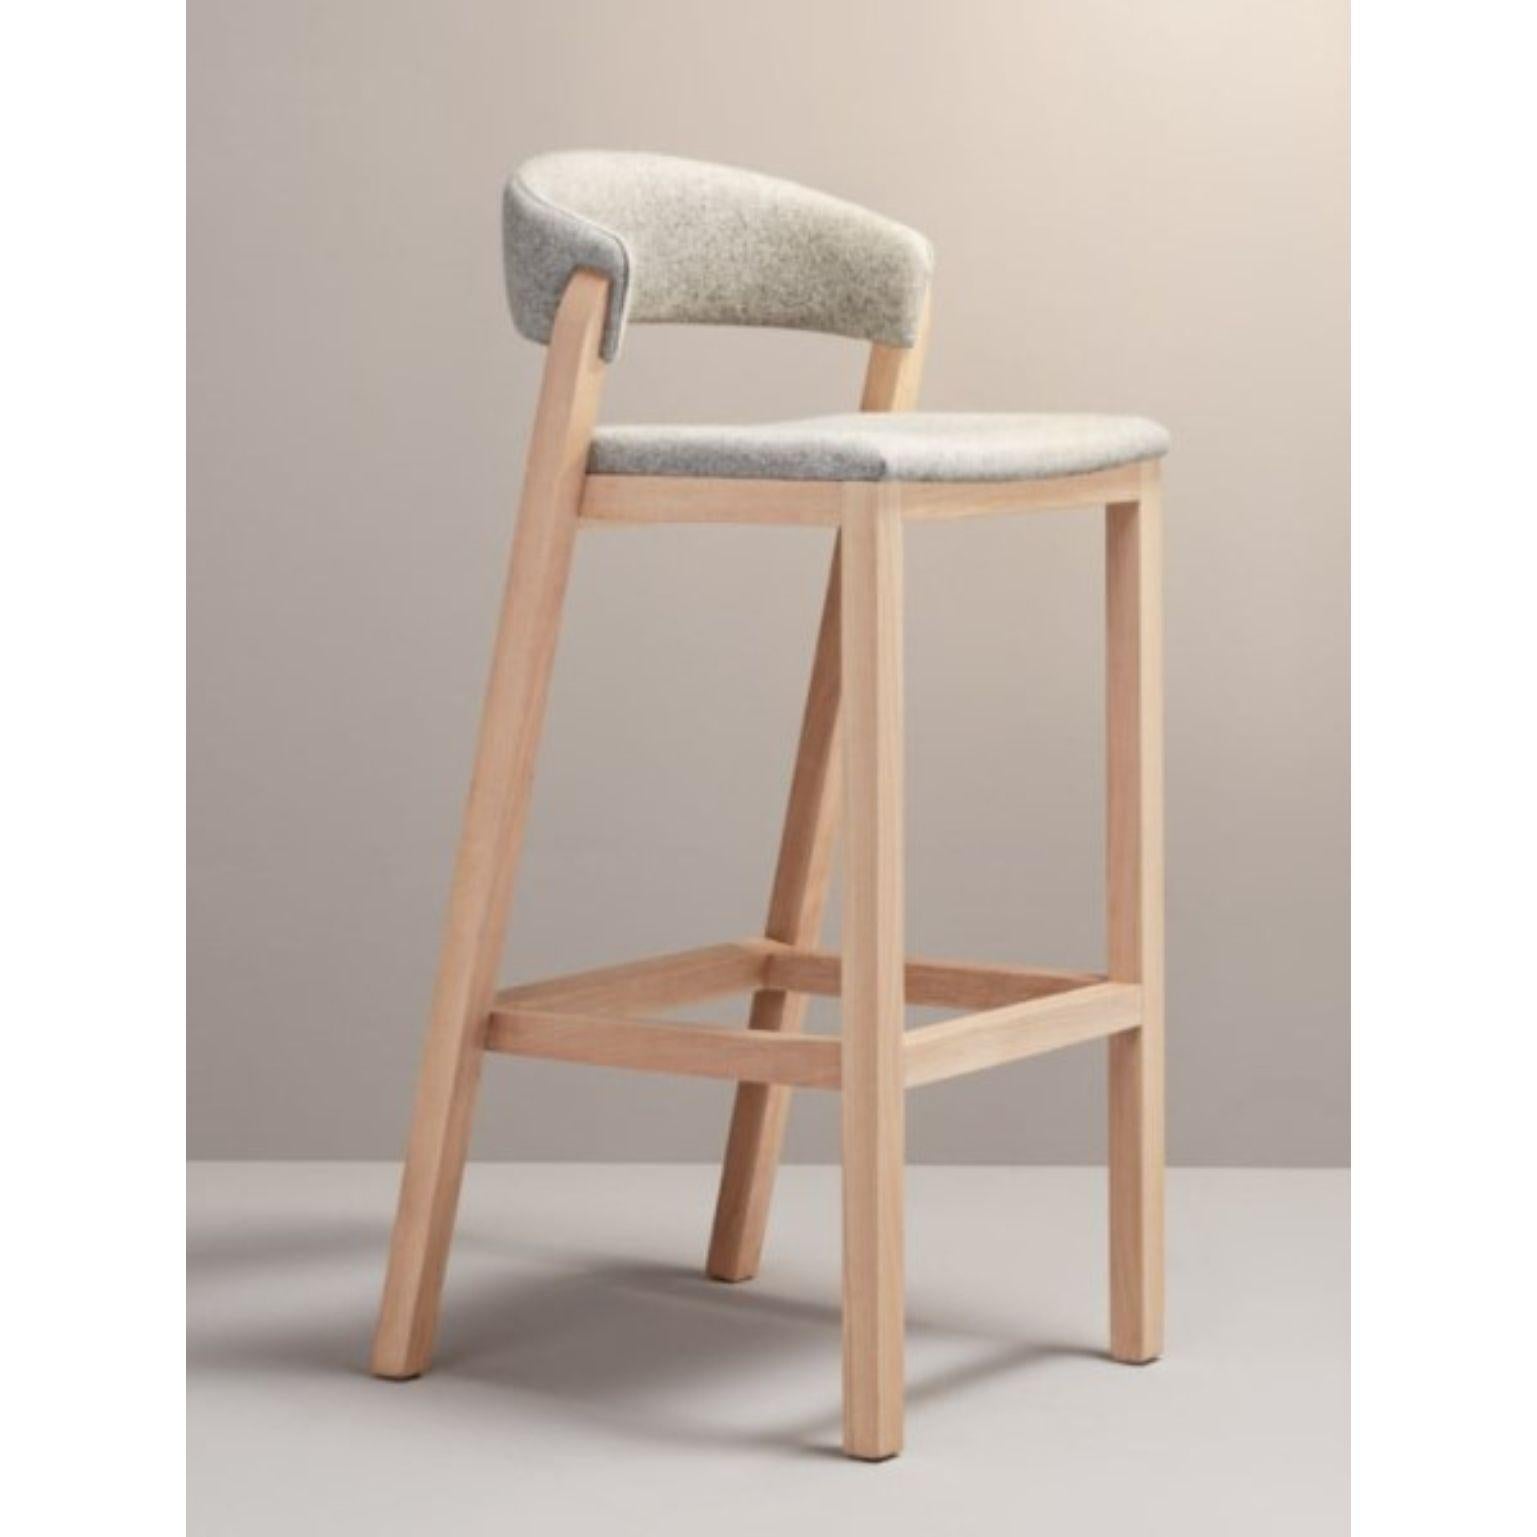 Cream Oslo stool by Pepe Albargues
Dimensions: W48, D50, H101, Seat78
Materials: Beech wood structure
Foam CMHR (high resilience and flame retardant) for all our cushion filling systems

Also available: Different Colors

Oslo collection is